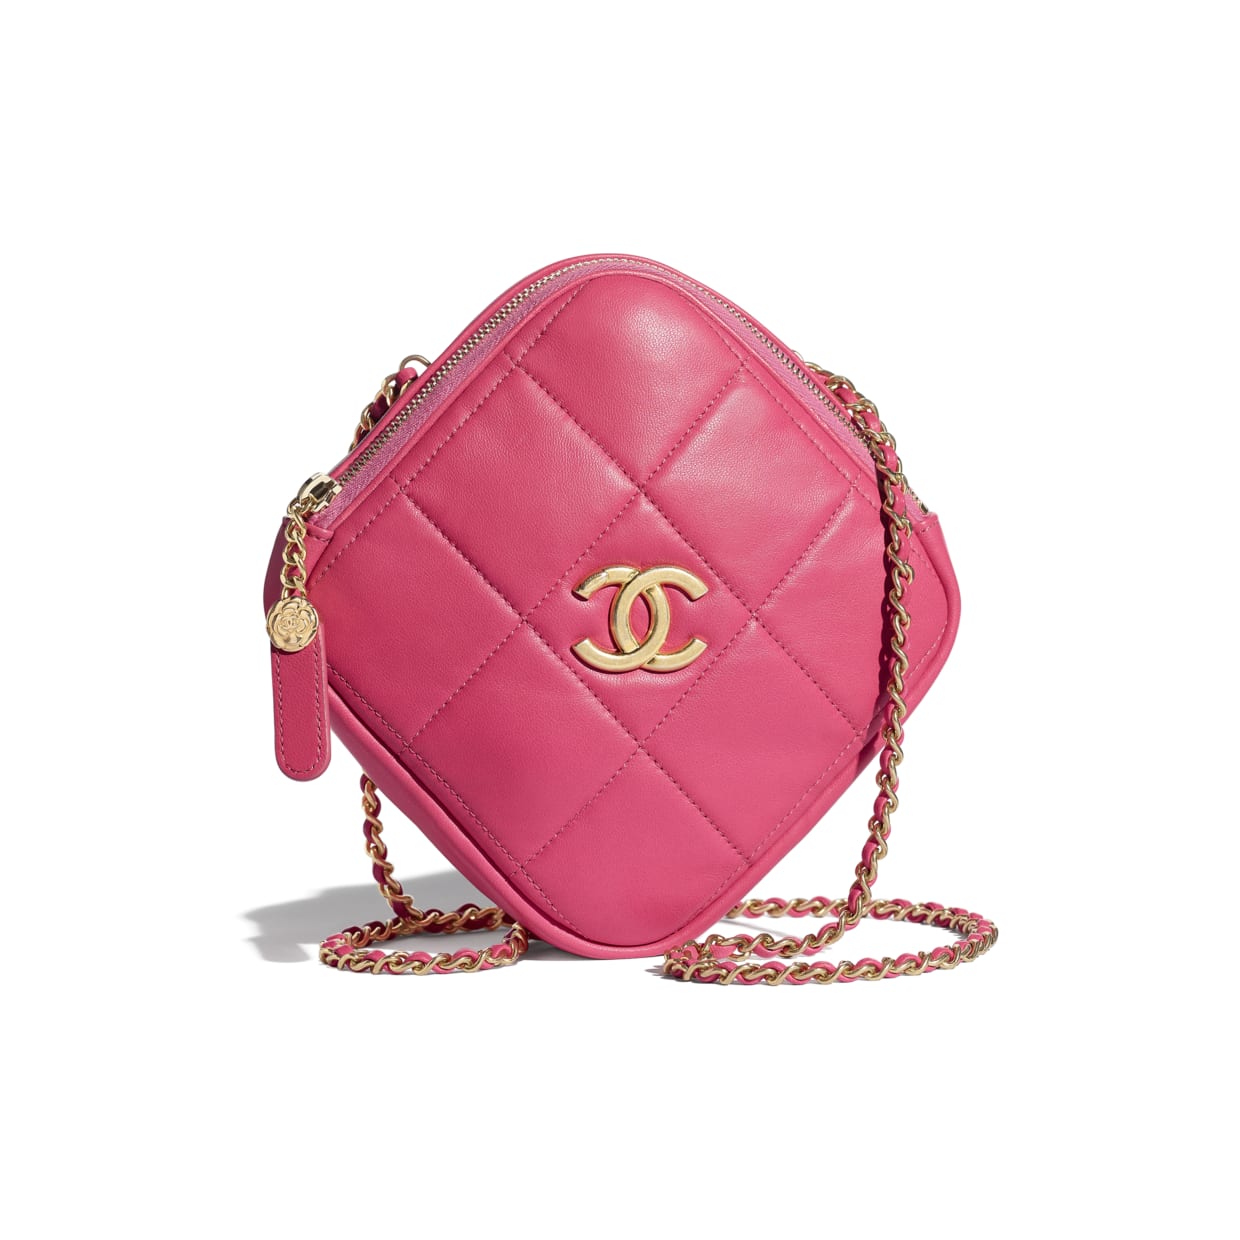 Chanel's Fall-Winter 2020/21 Collection is Finally Here - PurseBop